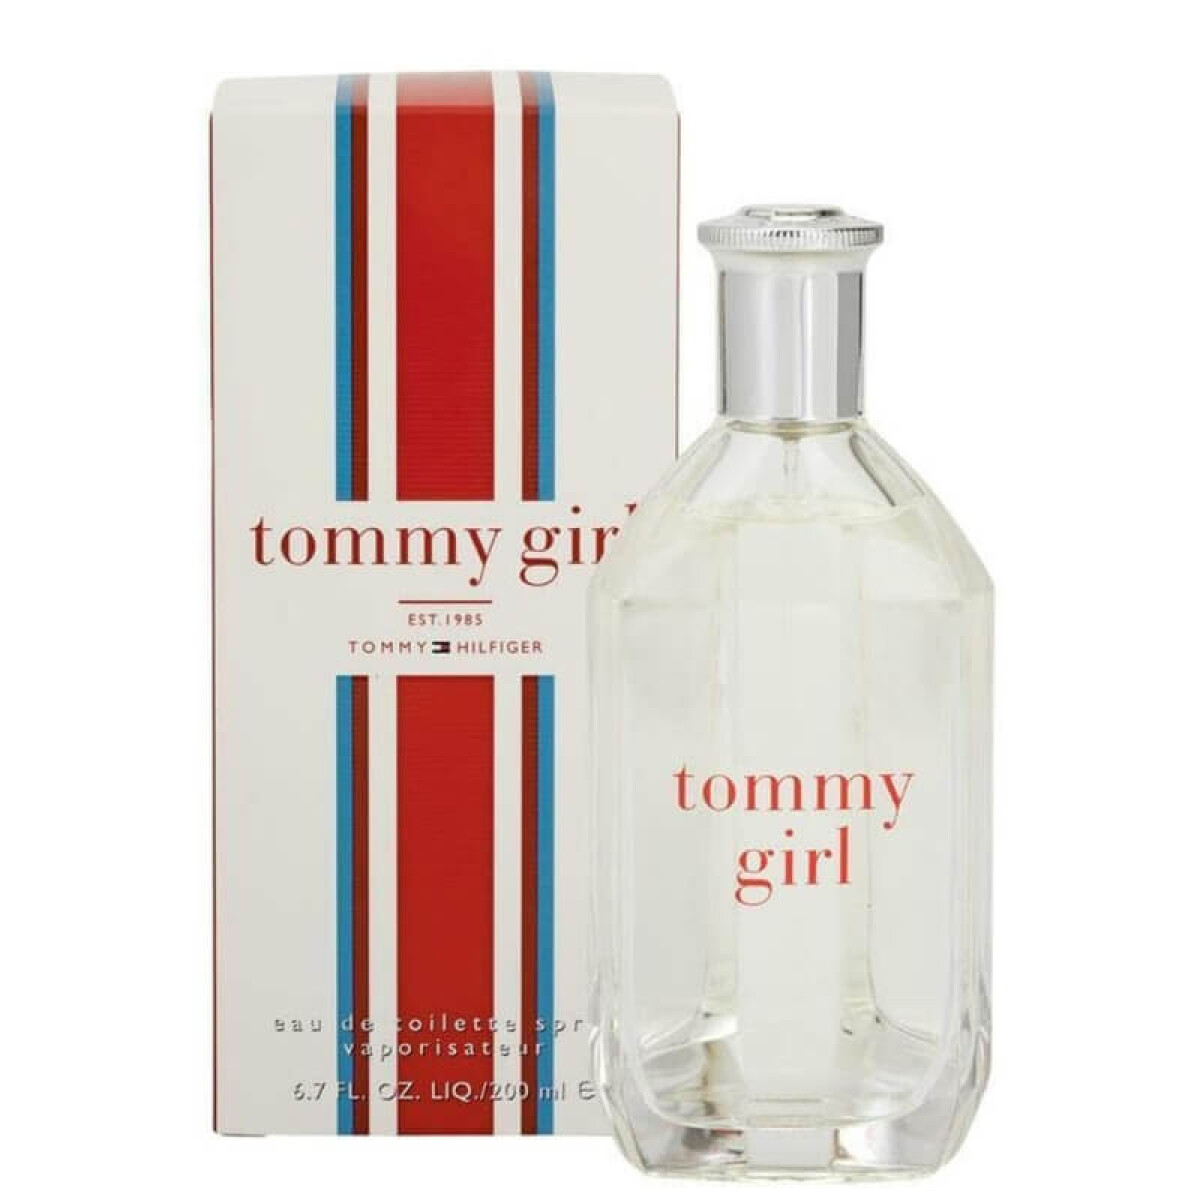 TOMMY GIRL EDT 200ML 